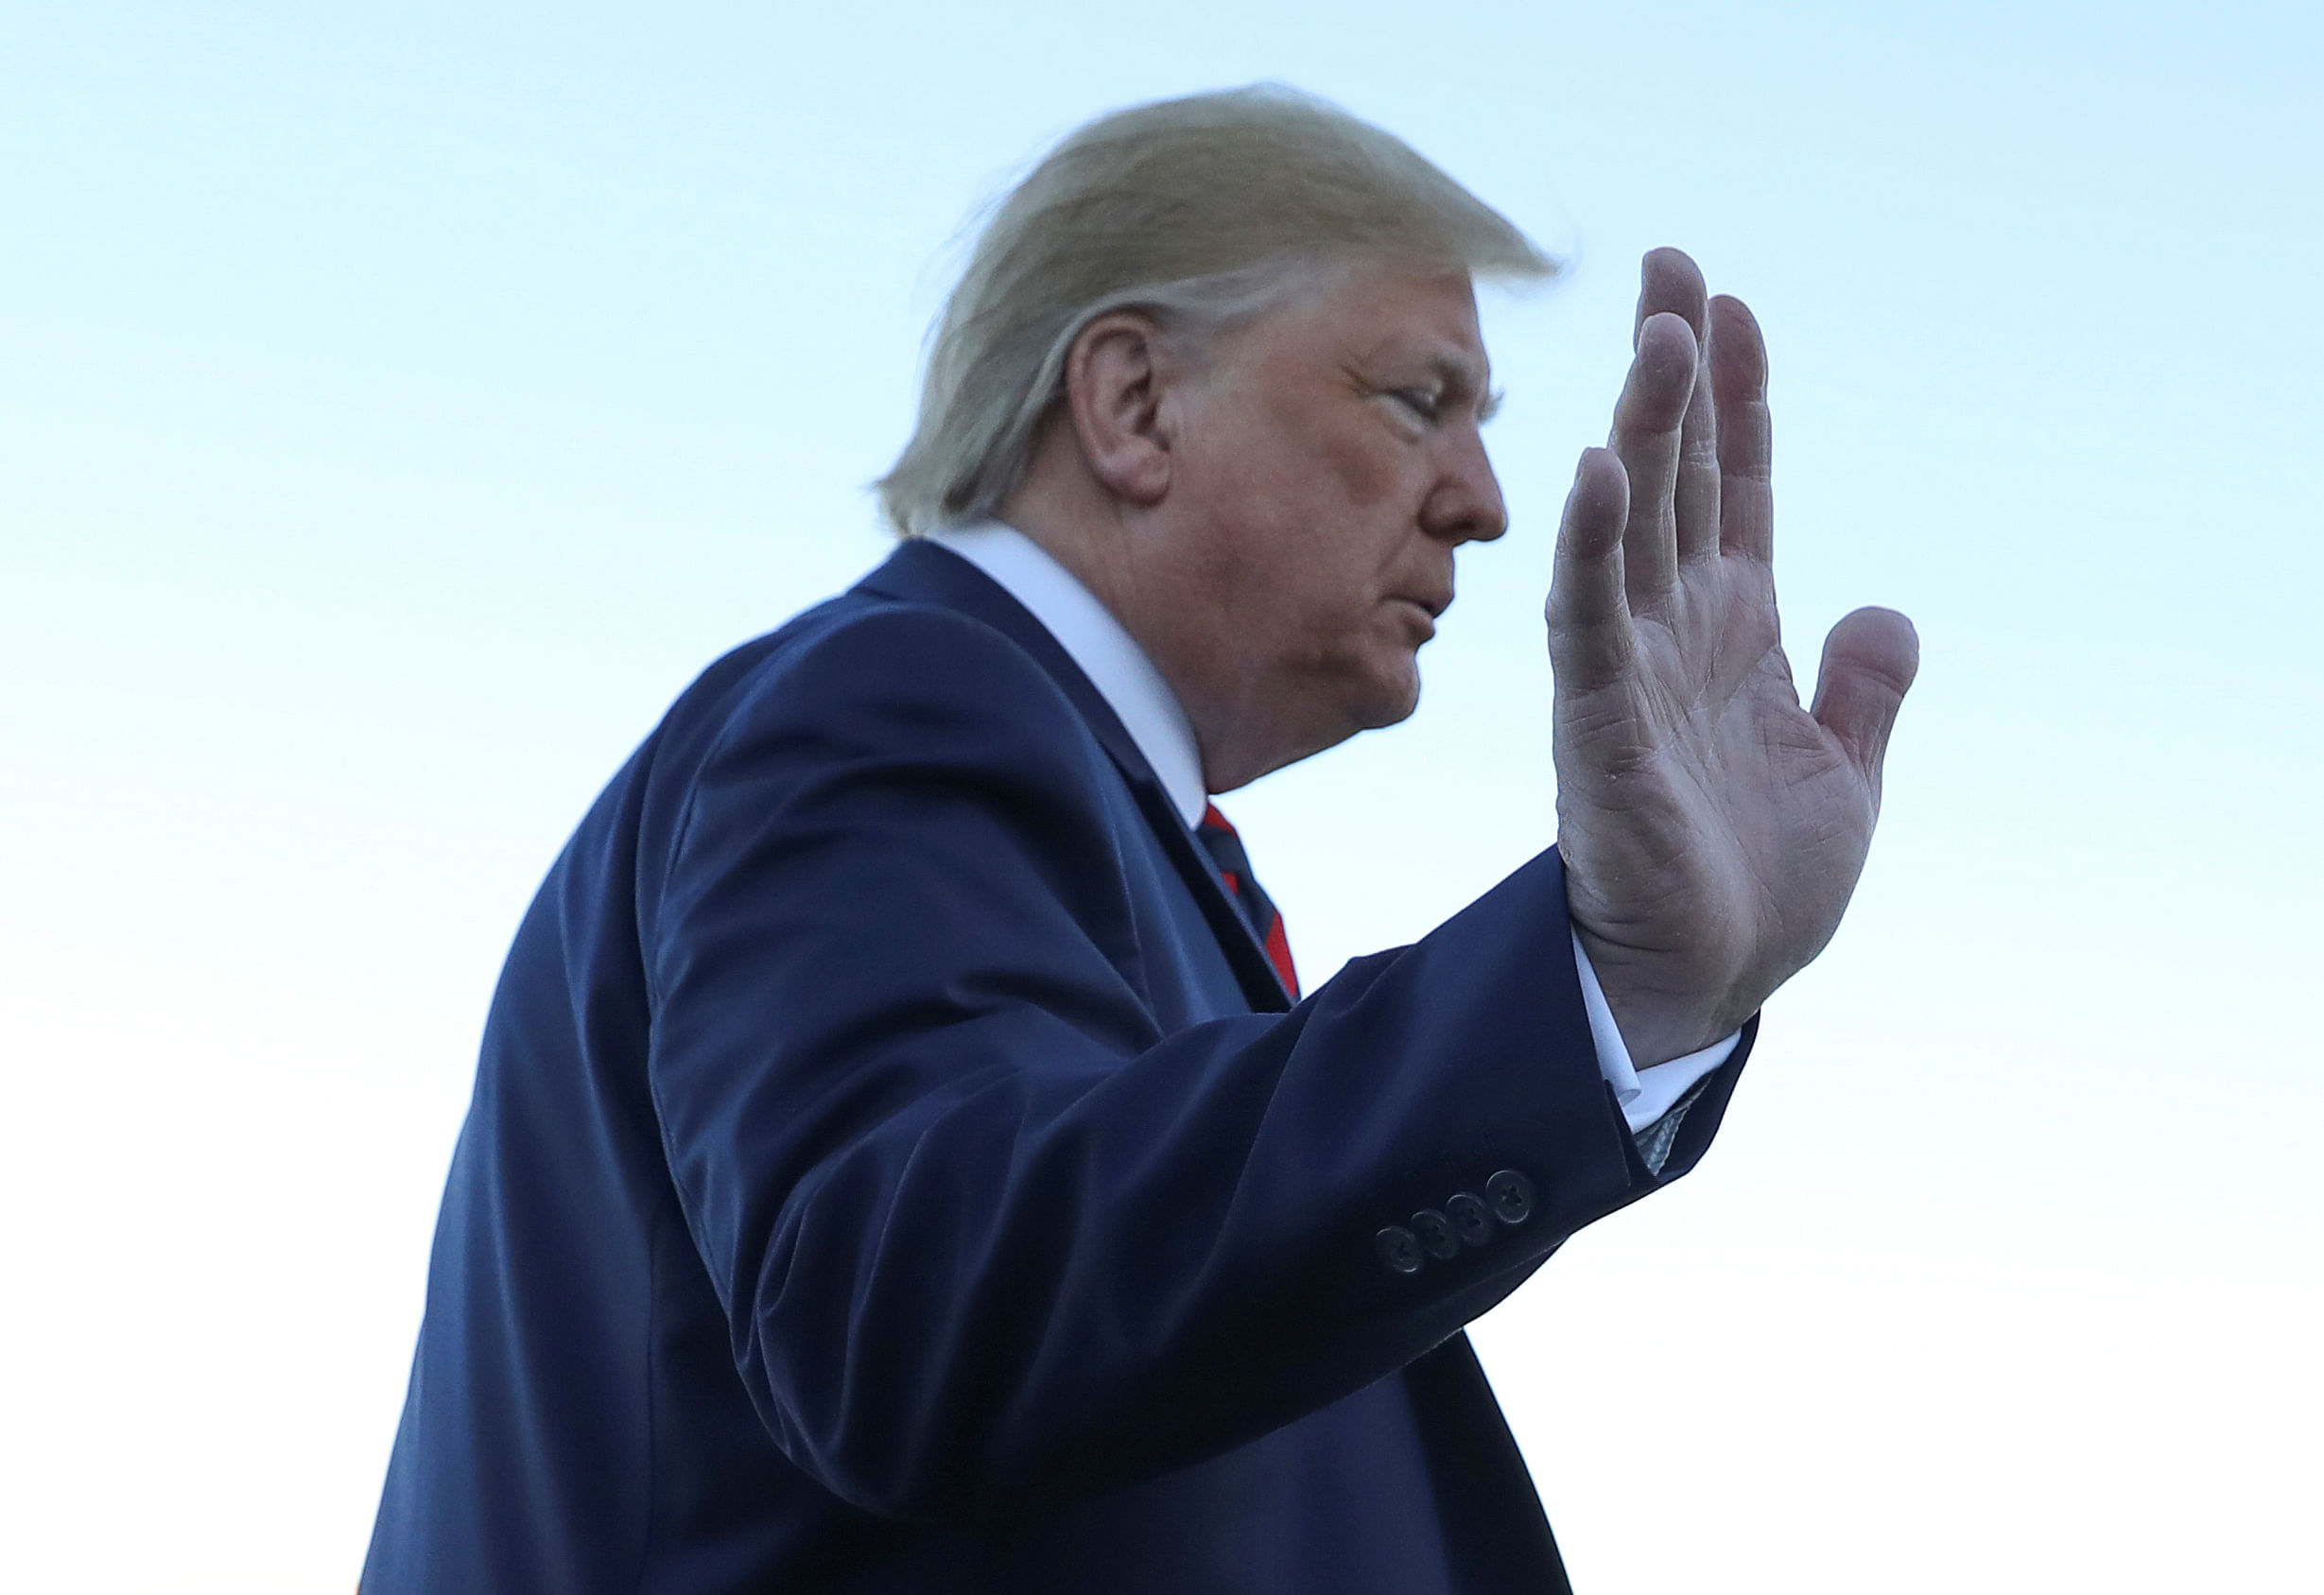 US President Donald Trump waves to reporters prior to departing Washington for travel to Chicago at Joint Base Andrews, Maryland, US. (Reuters Photo)